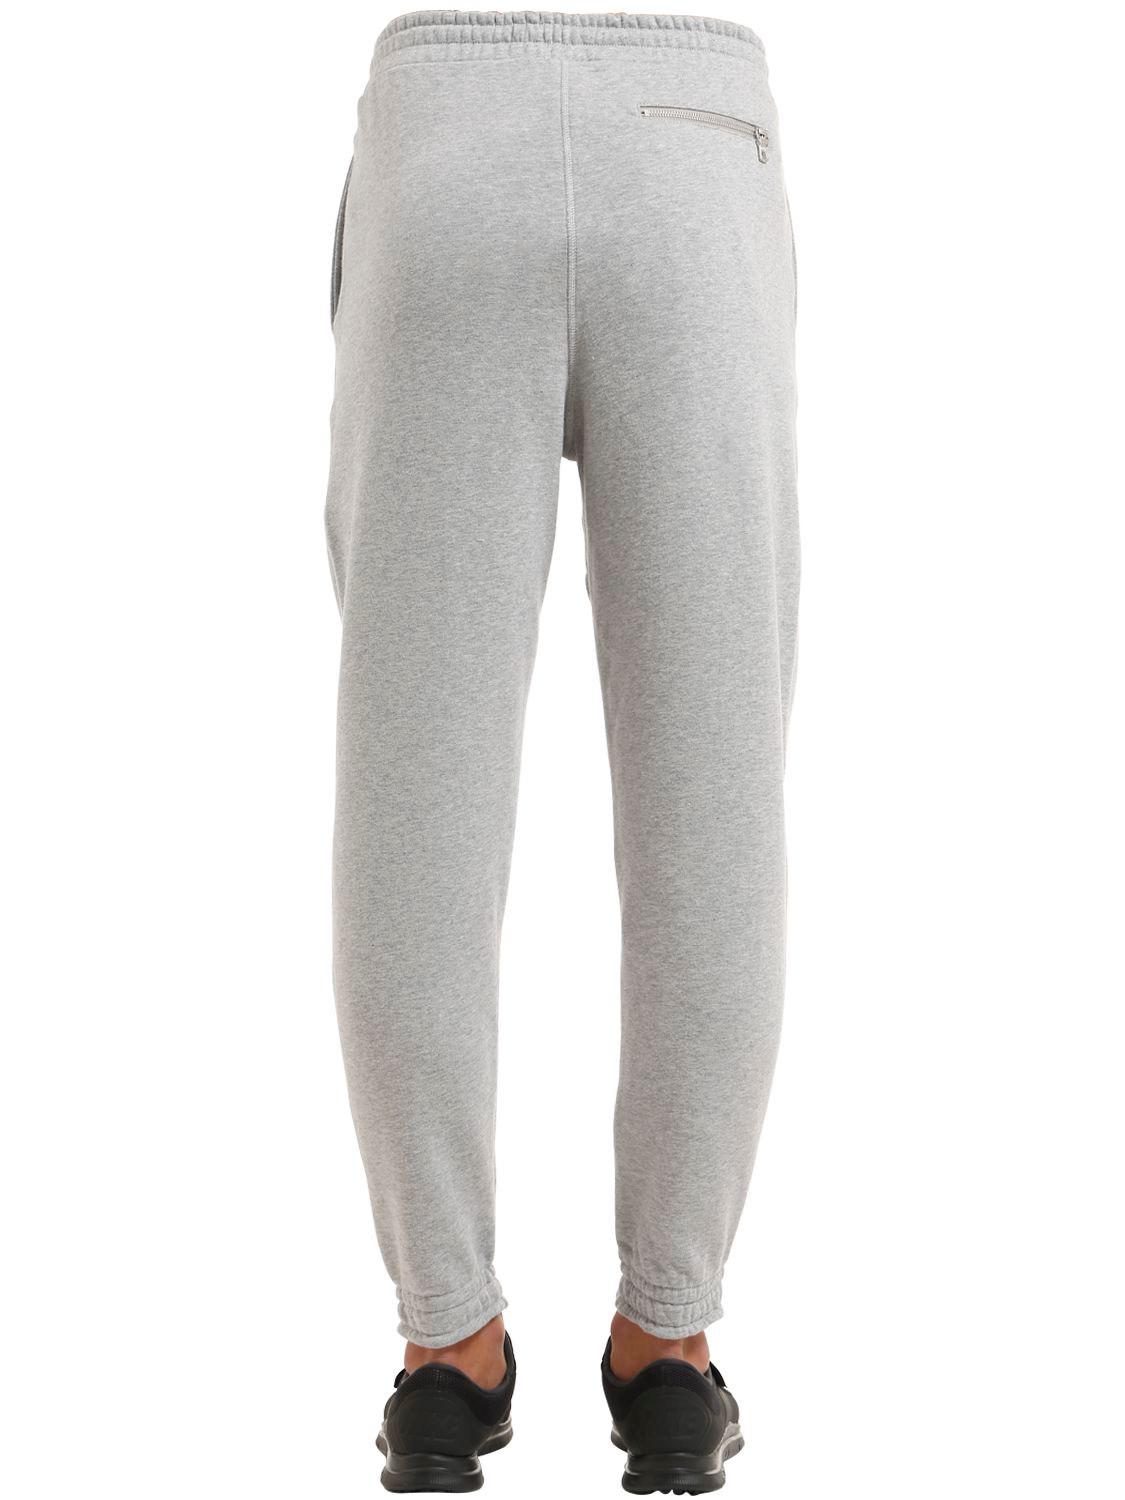 Nike Lab Made In Italy Sweat Pants in Grey (Gray) for Men - Lyst